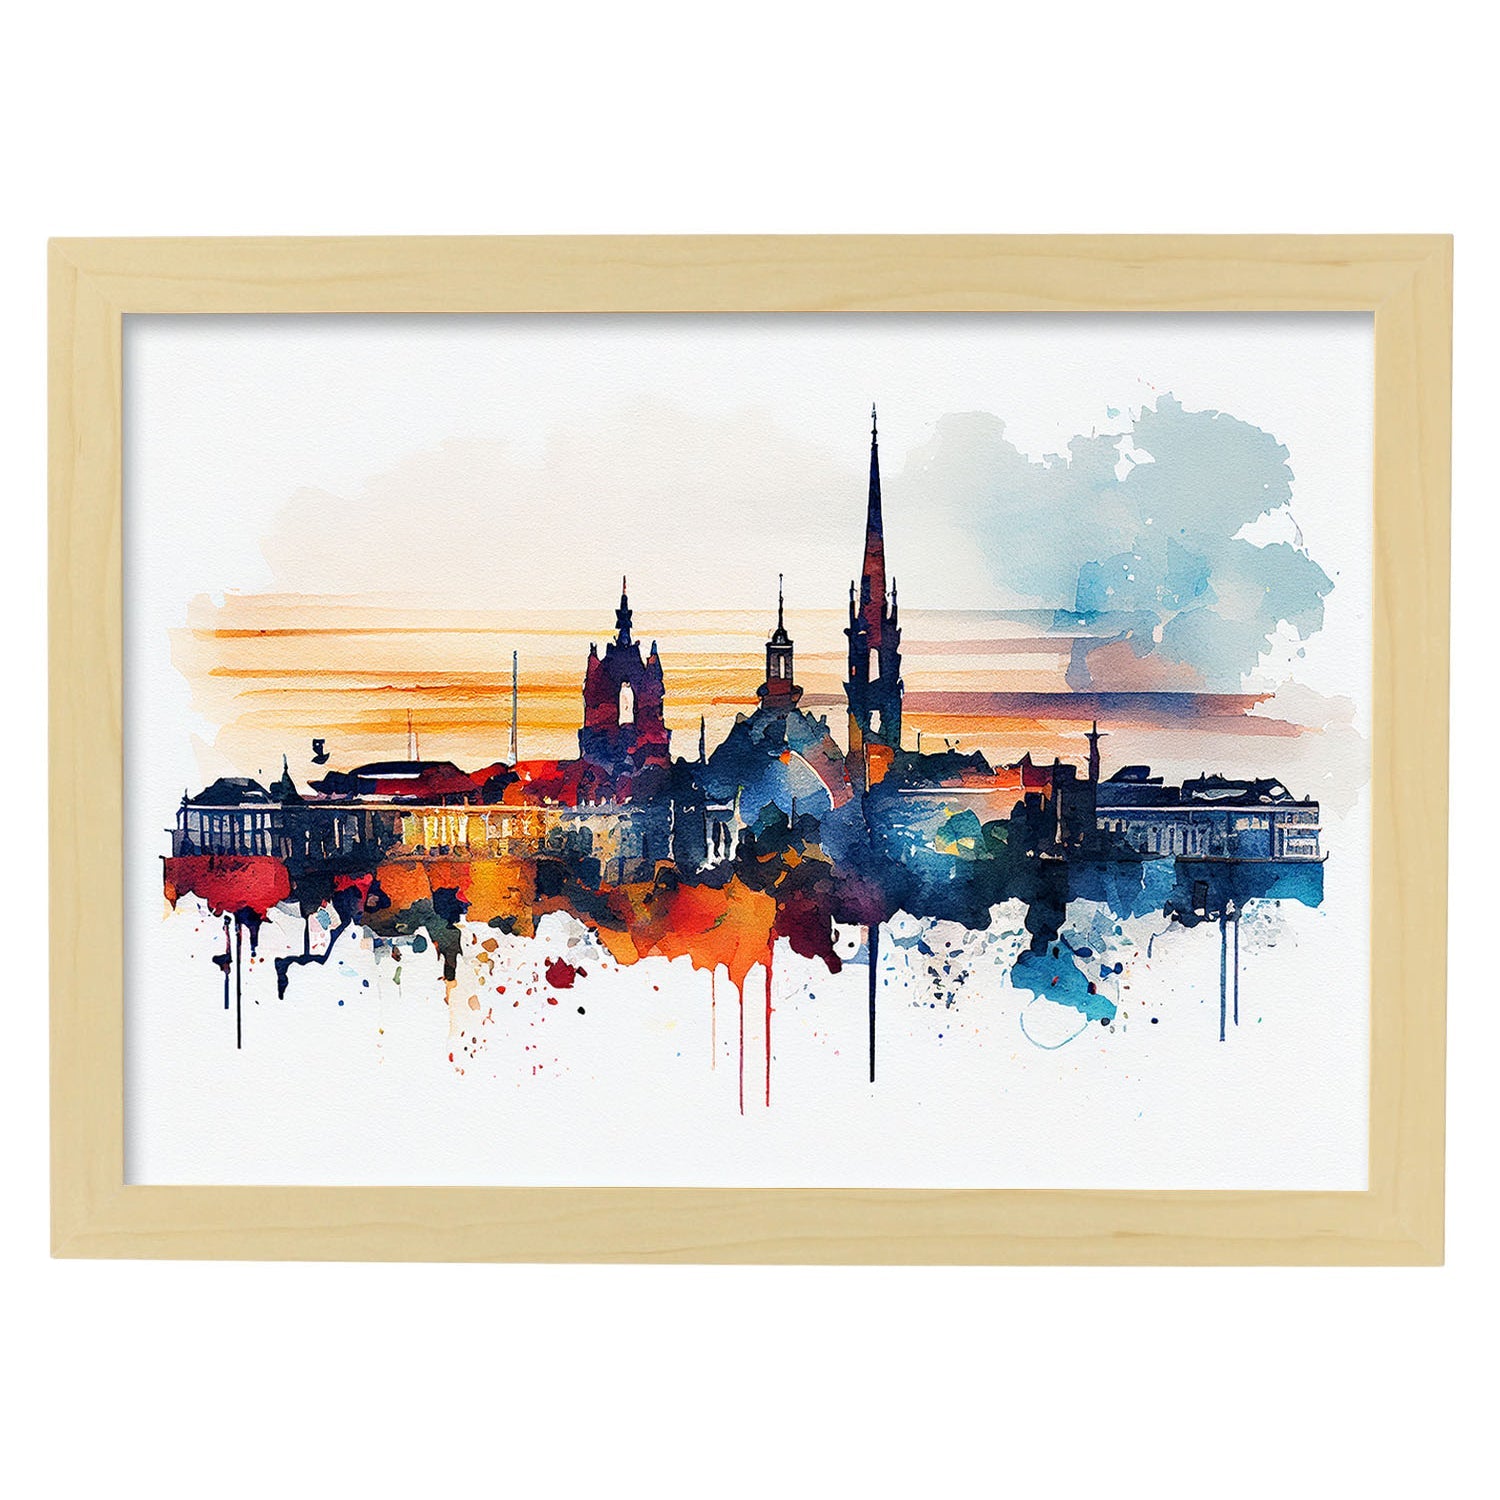 Nacnic watercolor of a skyline of the city of Bordeaux_1. Aesthetic Wall Art Prints for Bedroom or Living Room Design.-Artwork-Nacnic-A4-Marco Madera Clara-Nacnic Estudio SL